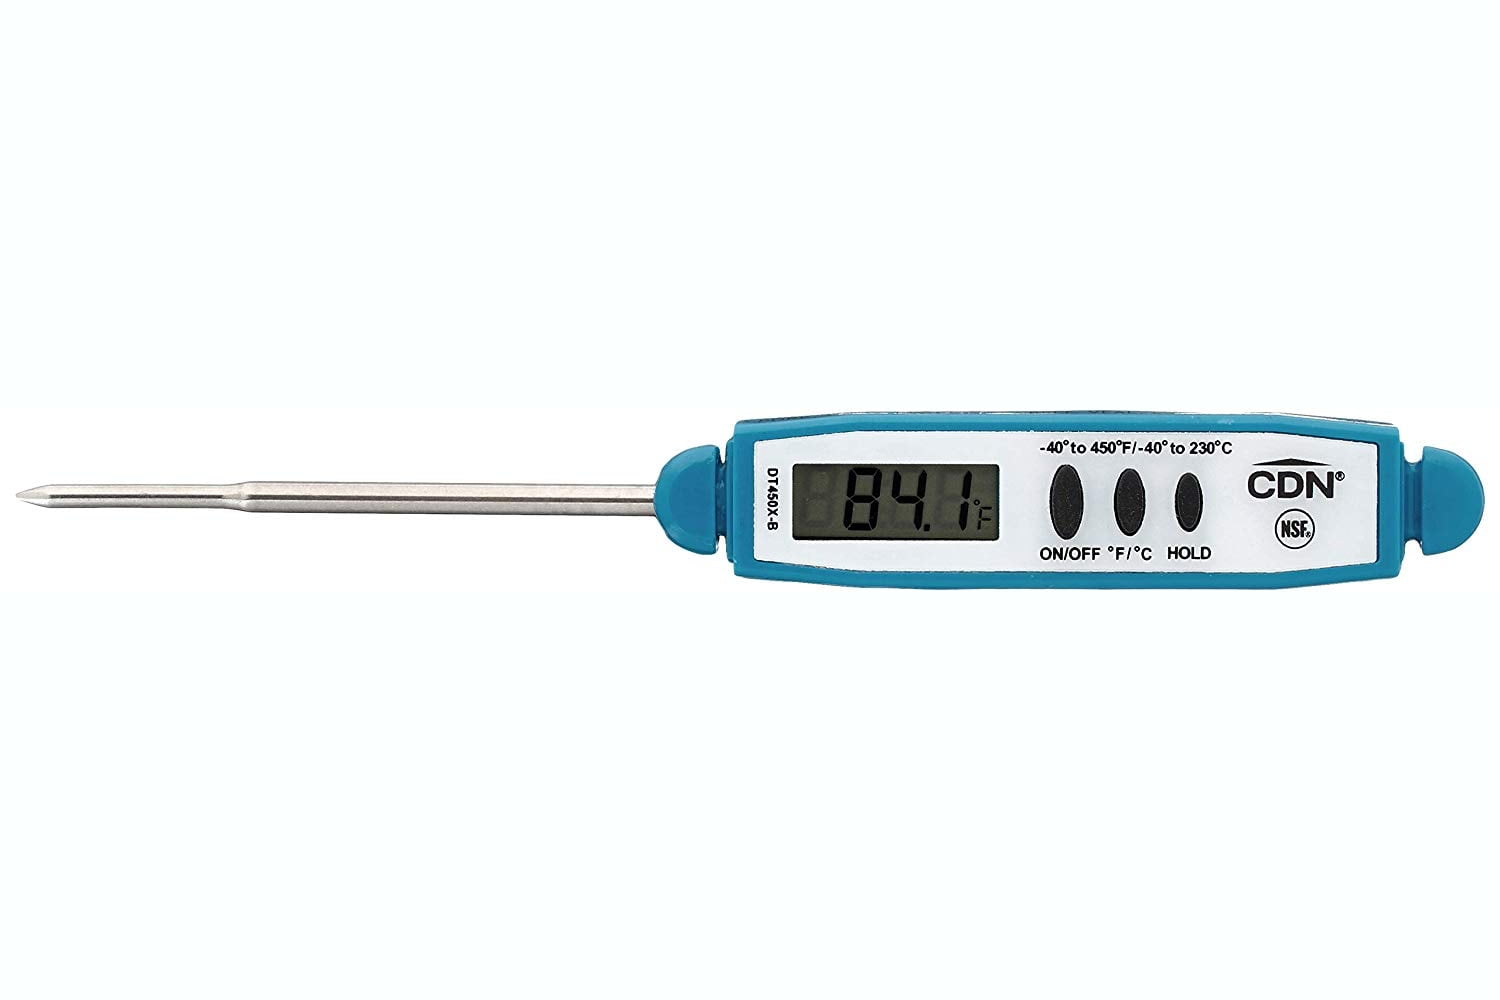 Bios Professional DT362 Premium Meat Thermometer and Timer